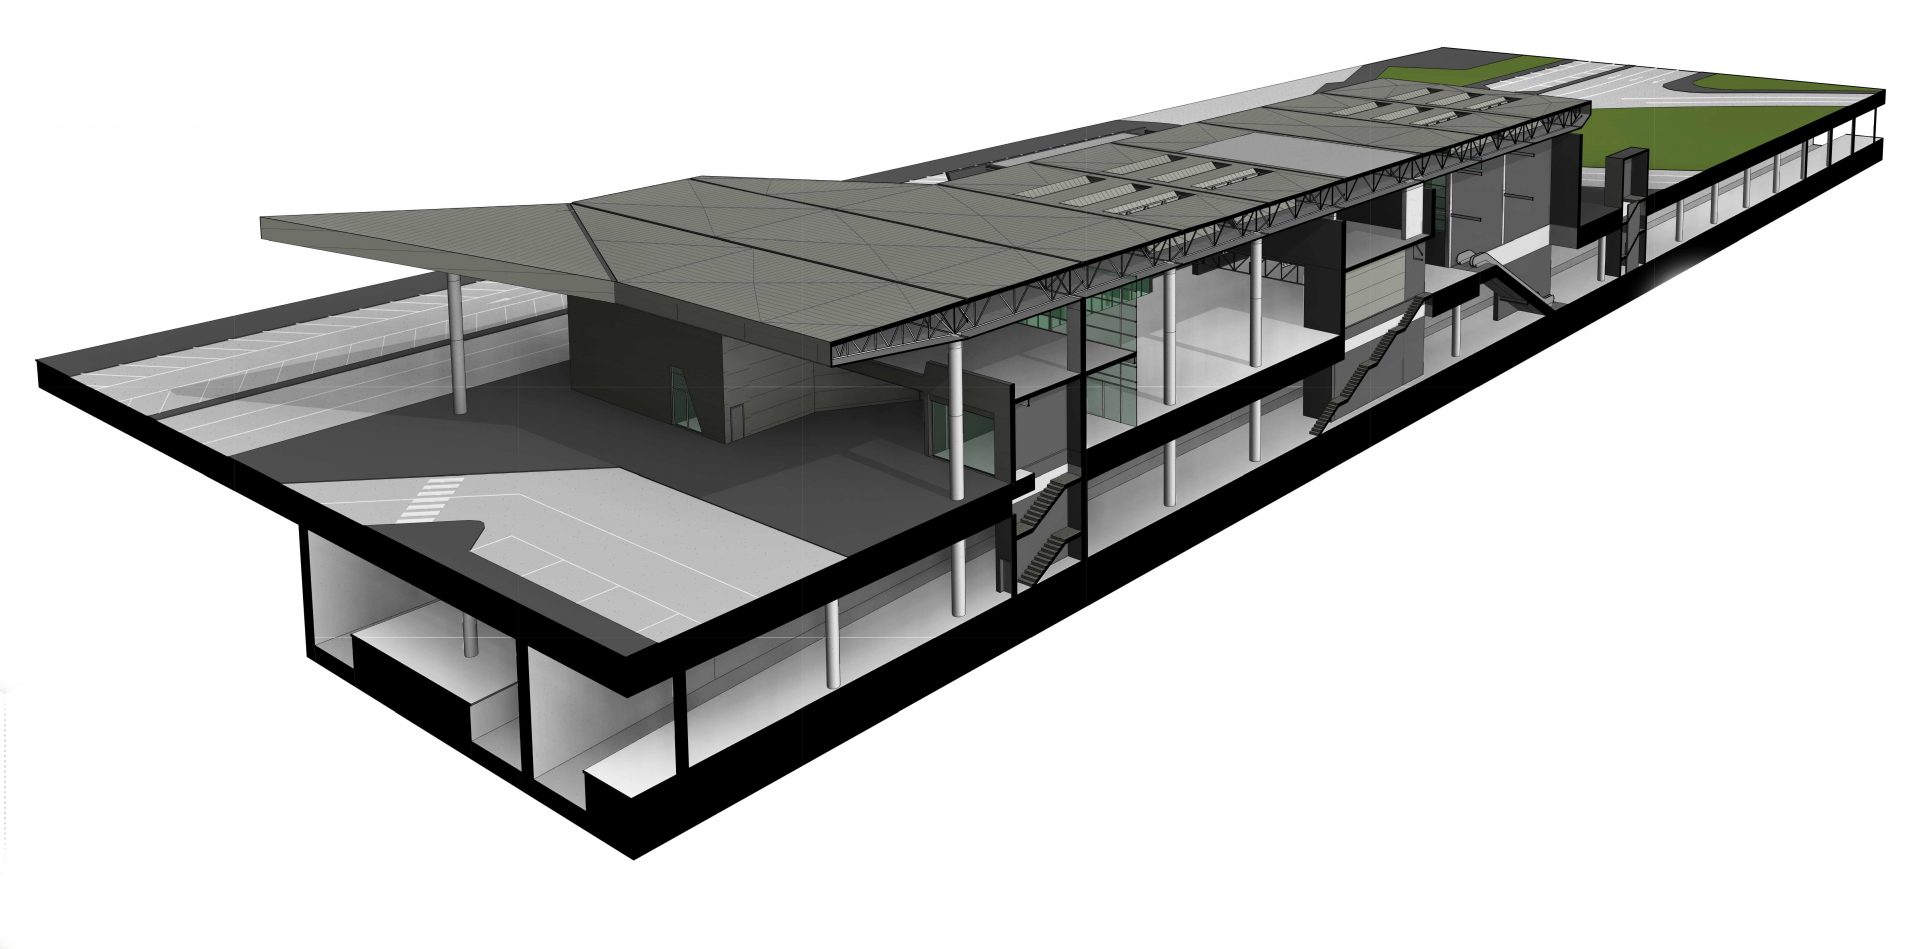 Image of a railway station project